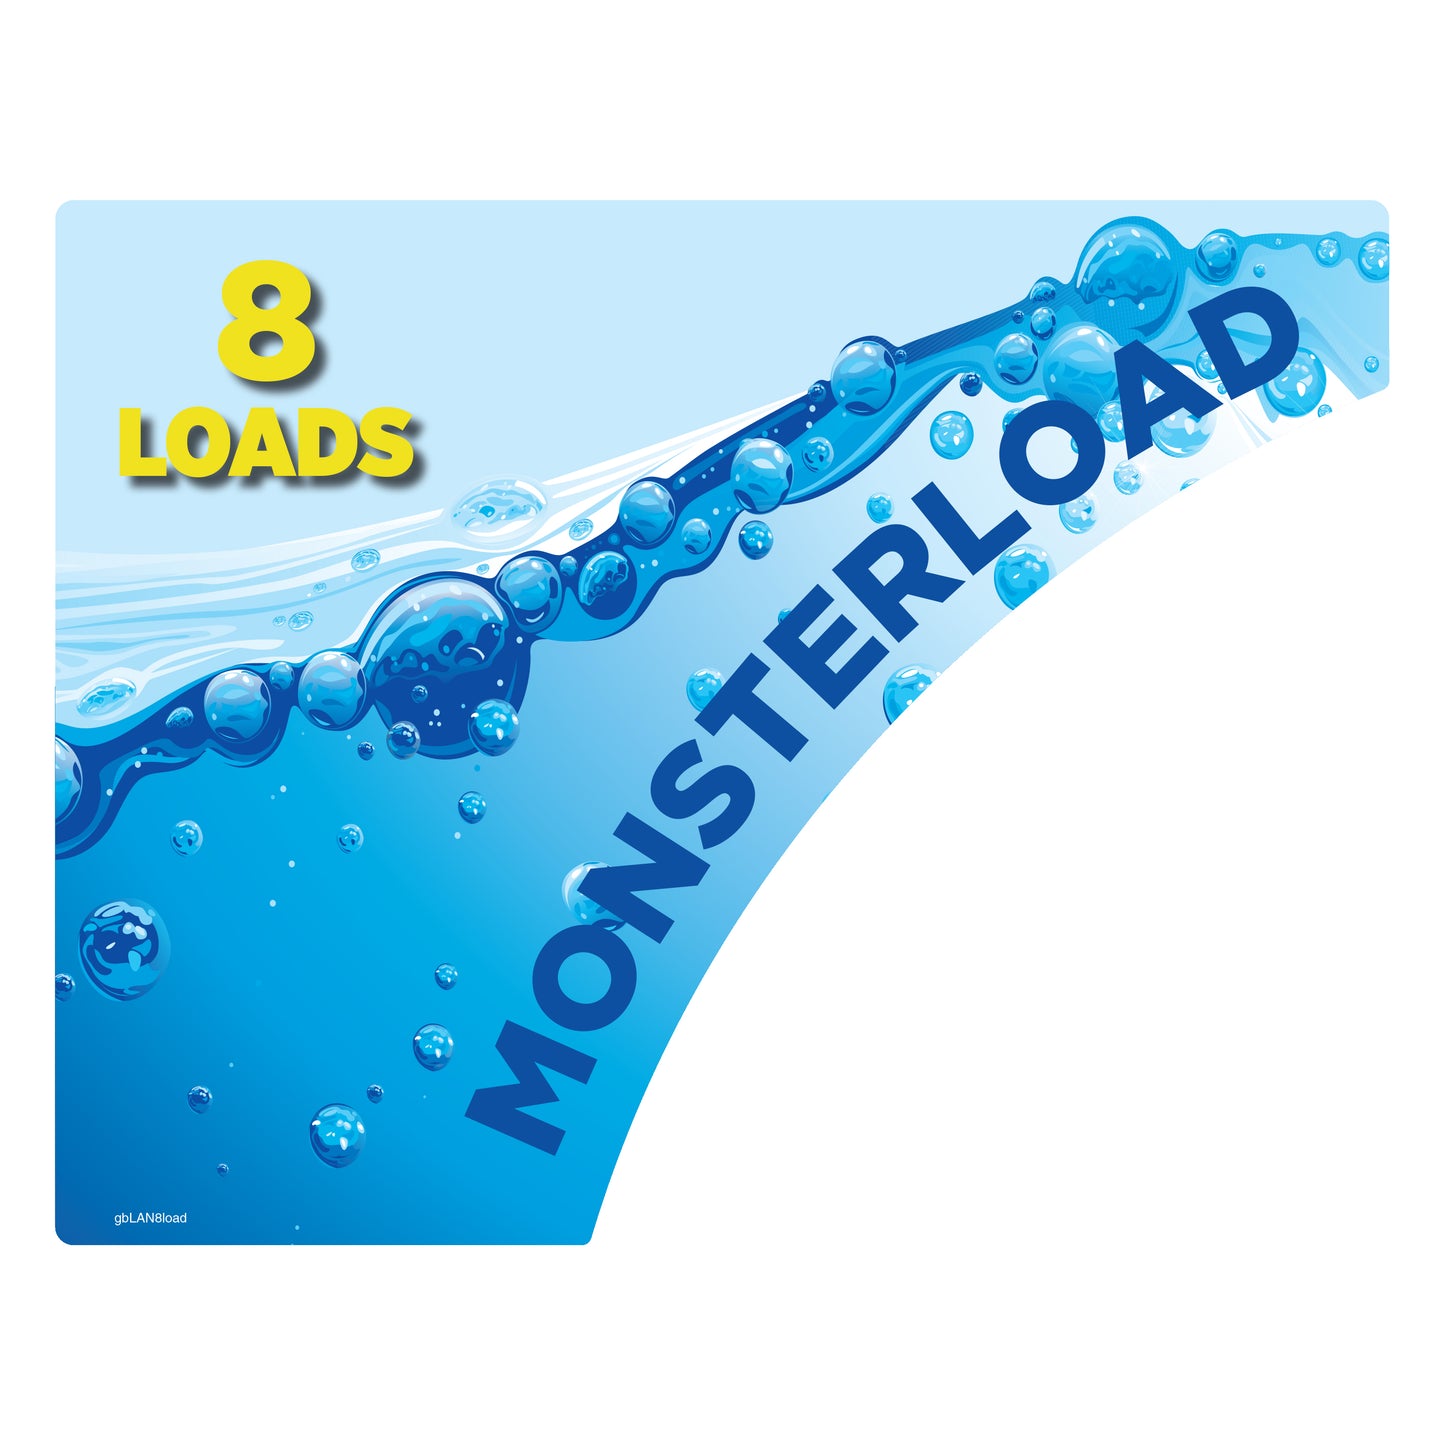 Decal for placement on washing machines at Laundromat displaying Monsterload - 8 Loads in size.